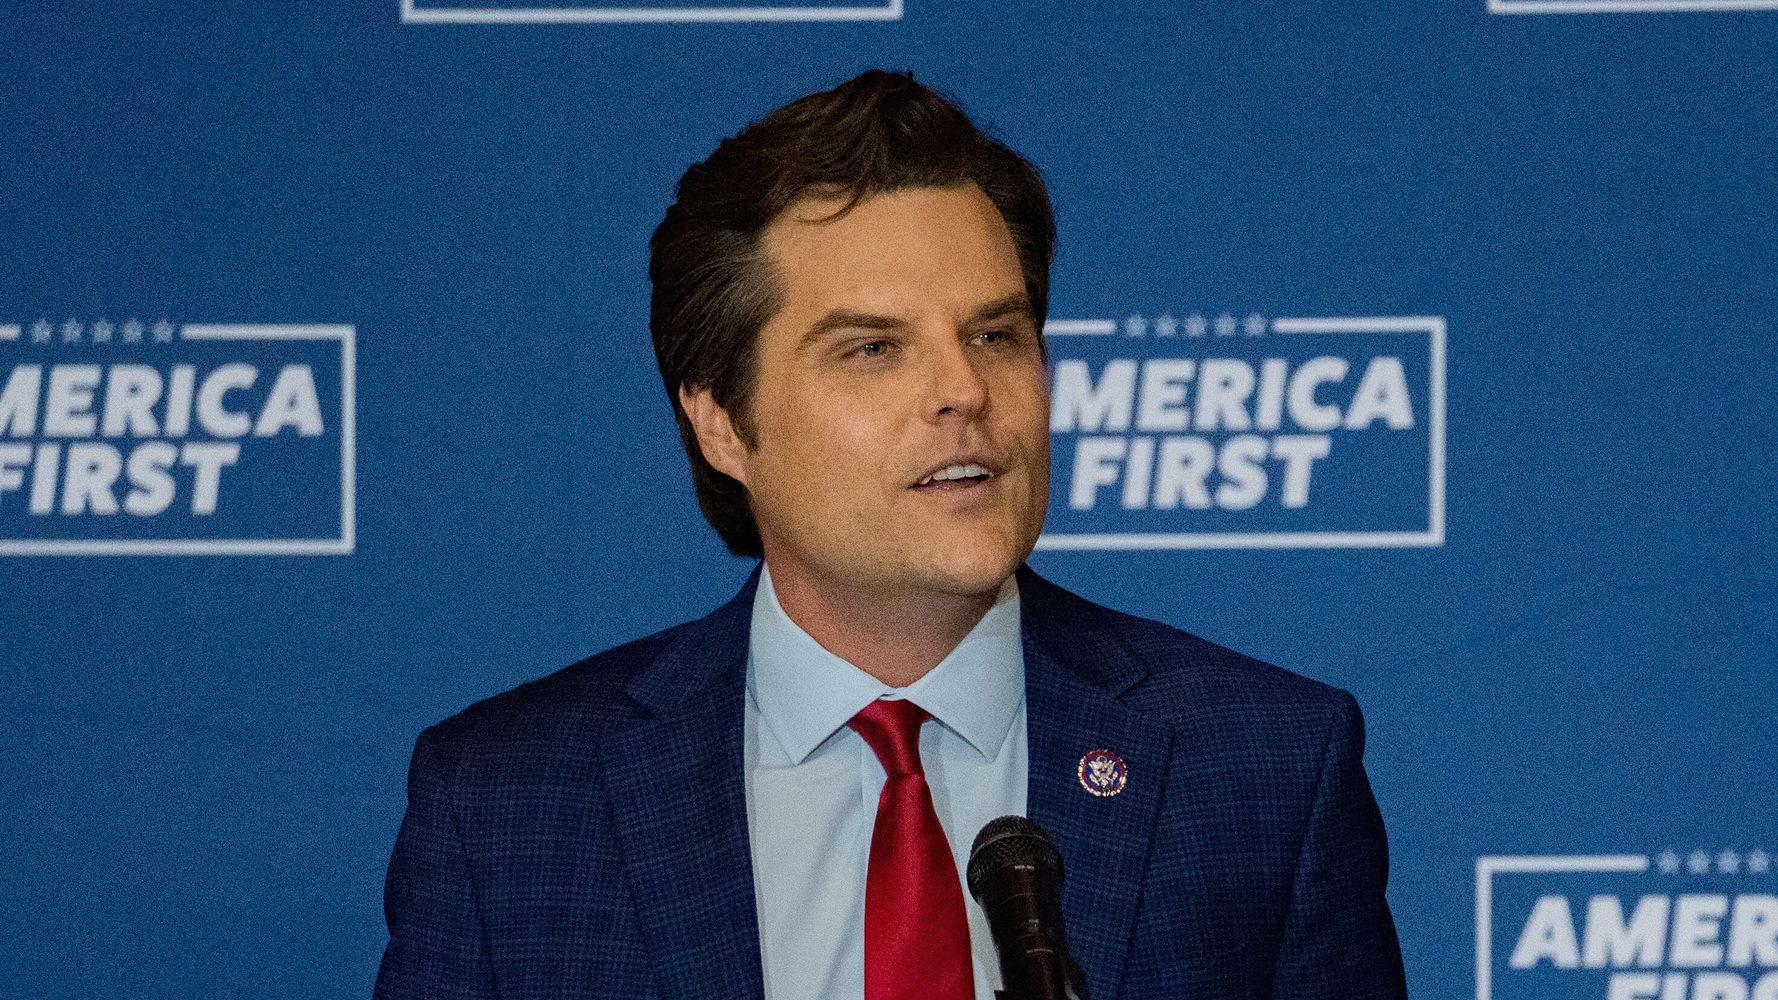 Matt Gaetz Suggests Shooting People In Silicon Valley For 'Cancel' Culture